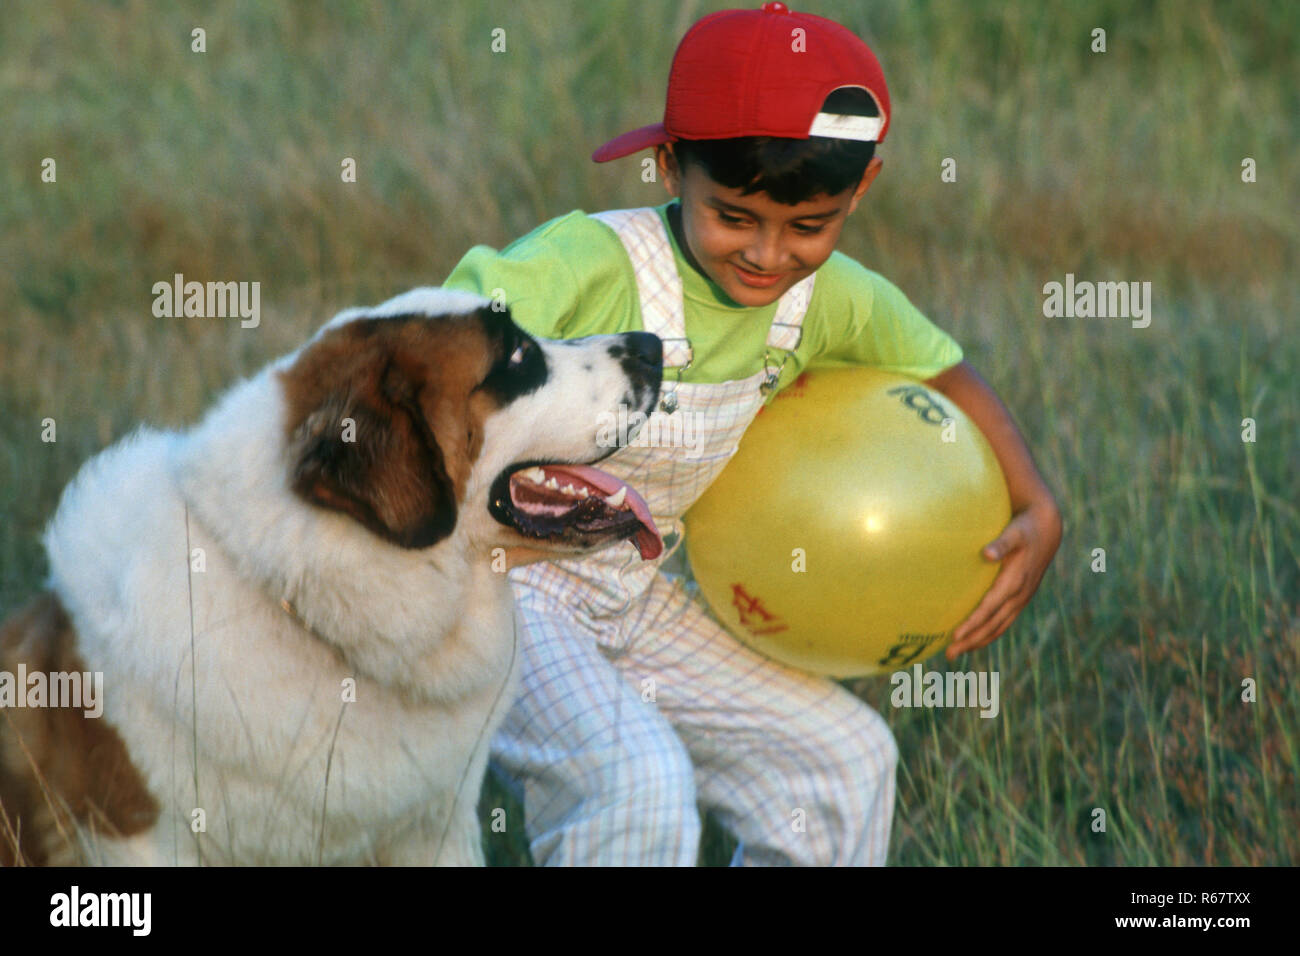 Boy playing with Pet Stock Photo